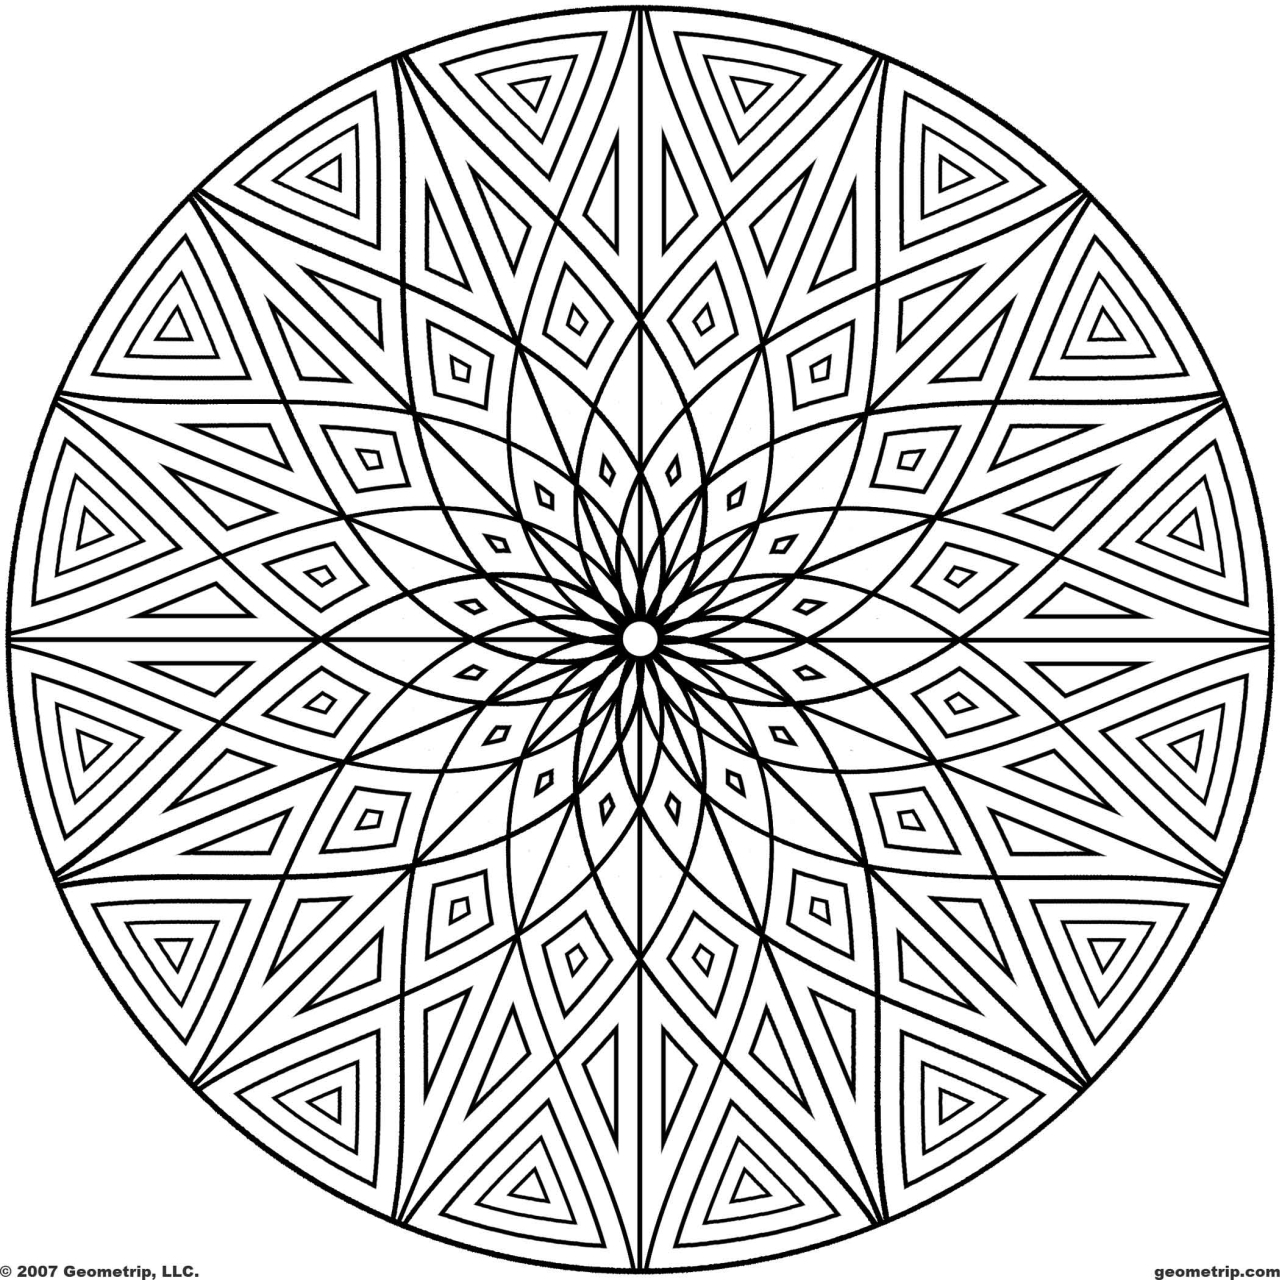 Geometric Coloring Page Get This Hard Geometric Coloring Pages To Print Out 69031